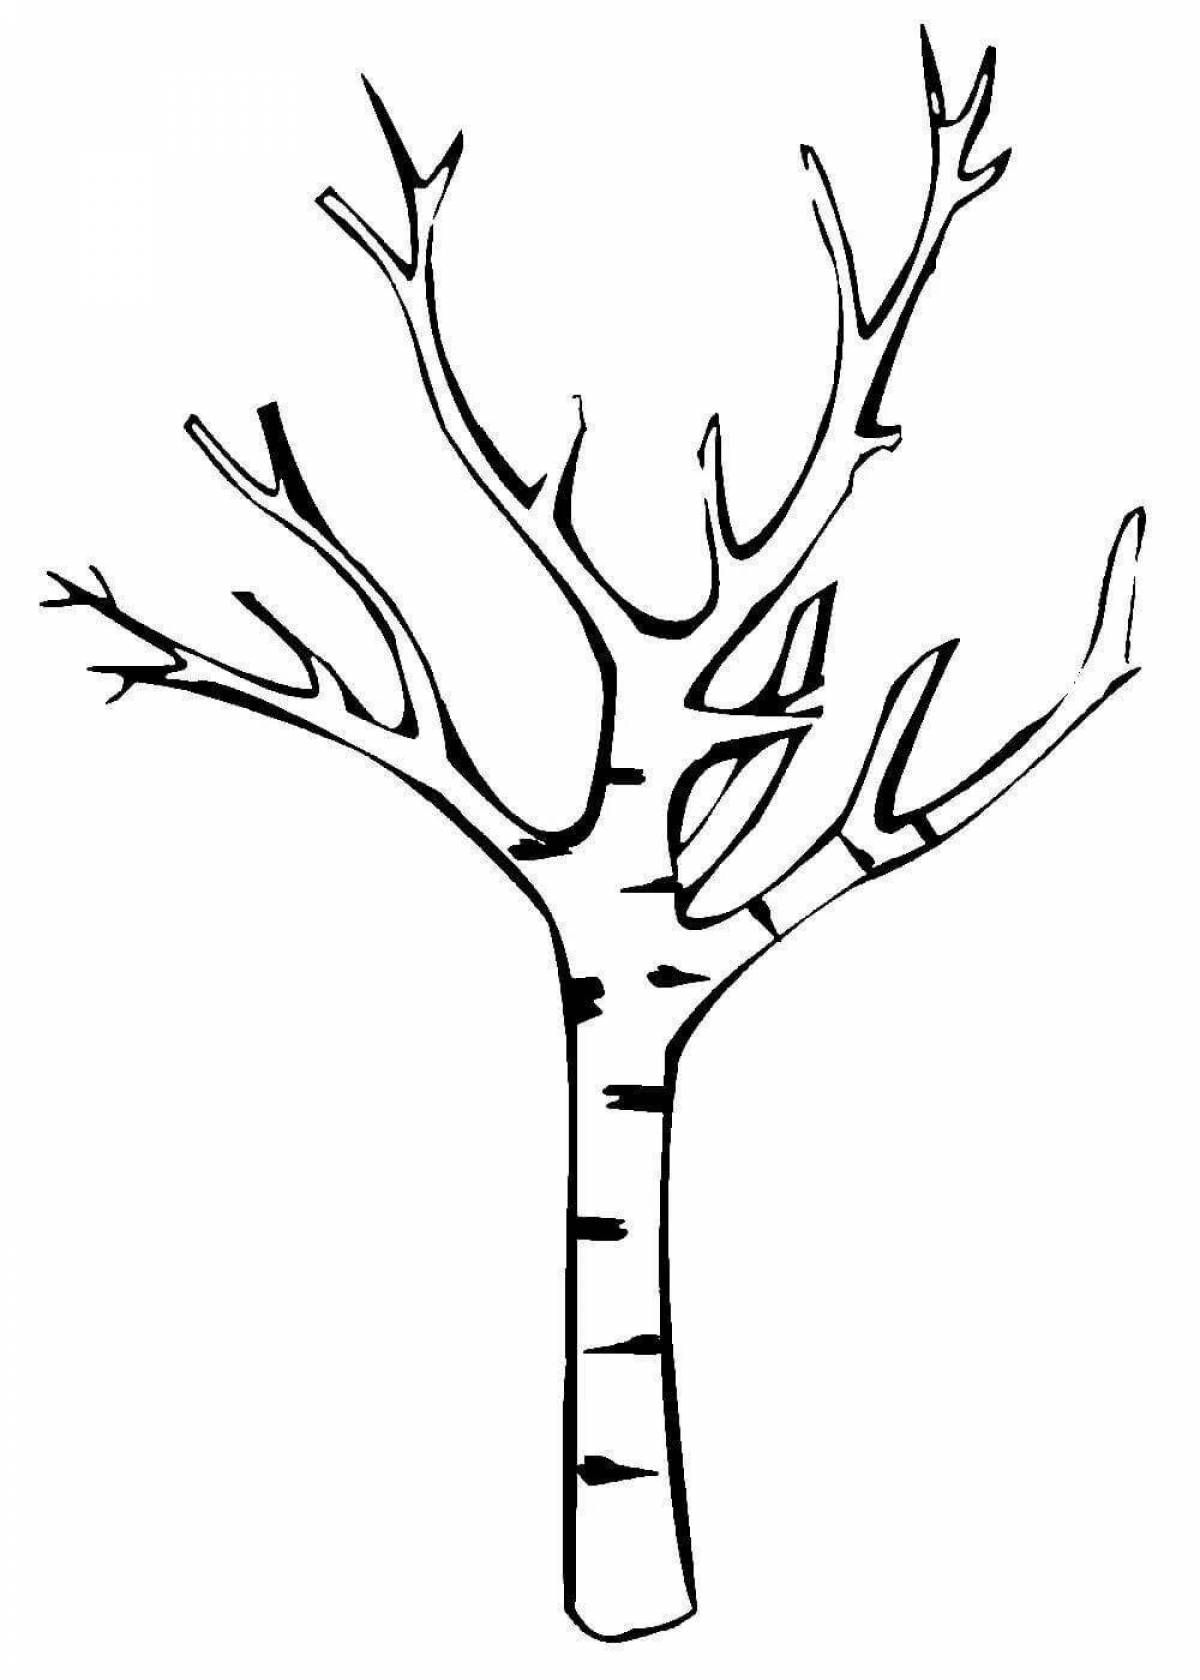 A cheerful drawing of a sprawling tree